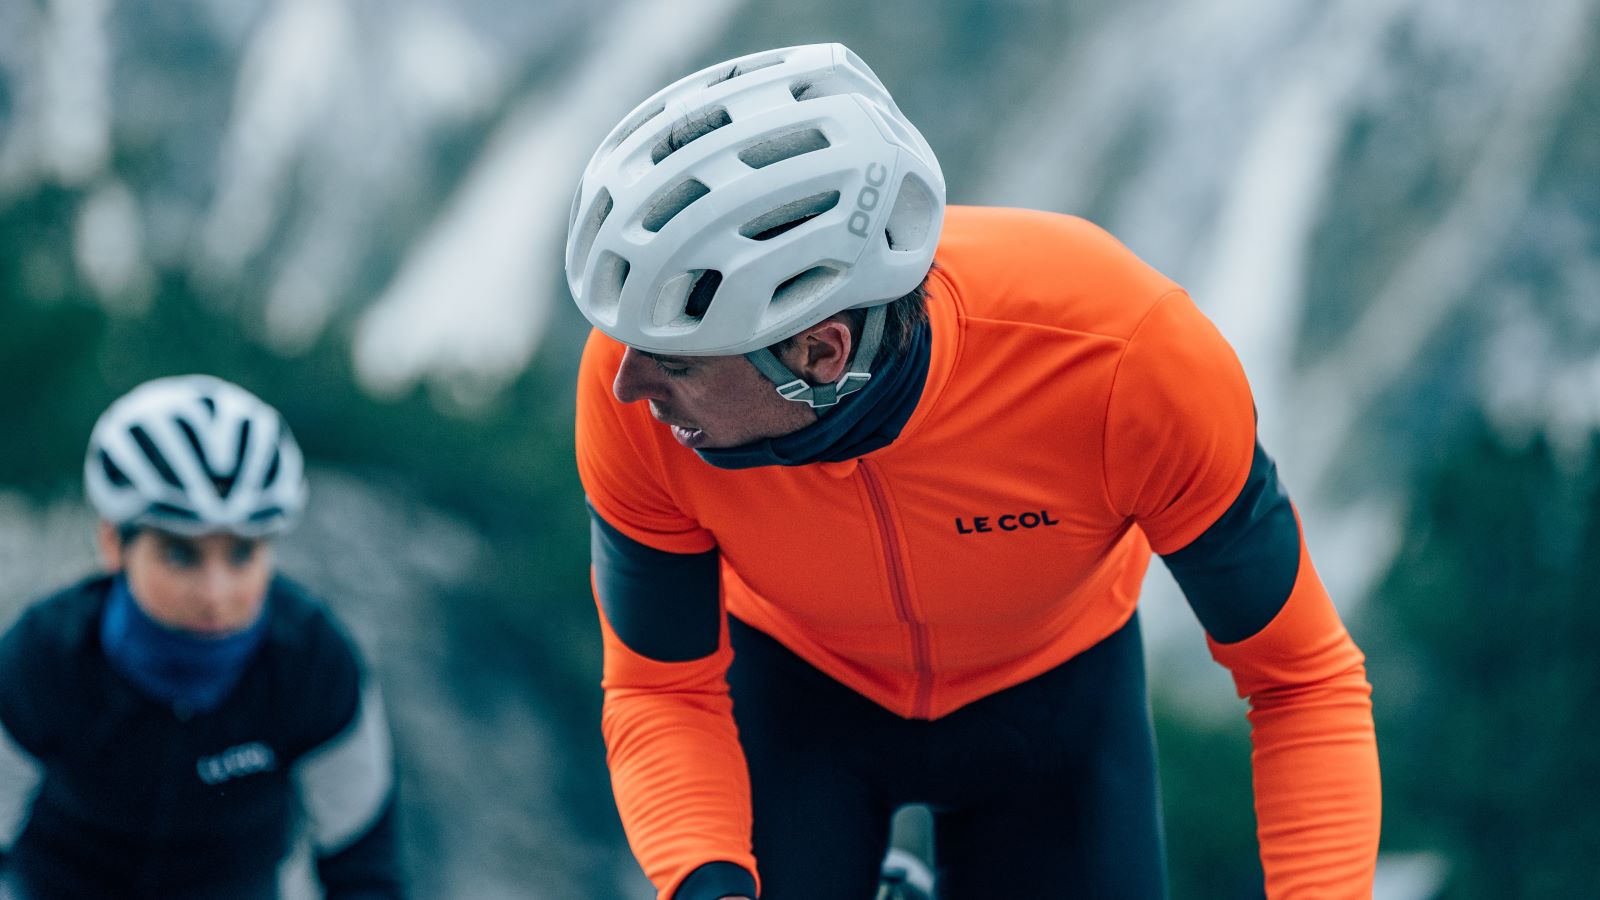 Polartec Power Shield Adopted By Le Col In AW23 Collection - Boardsport  SOURCE